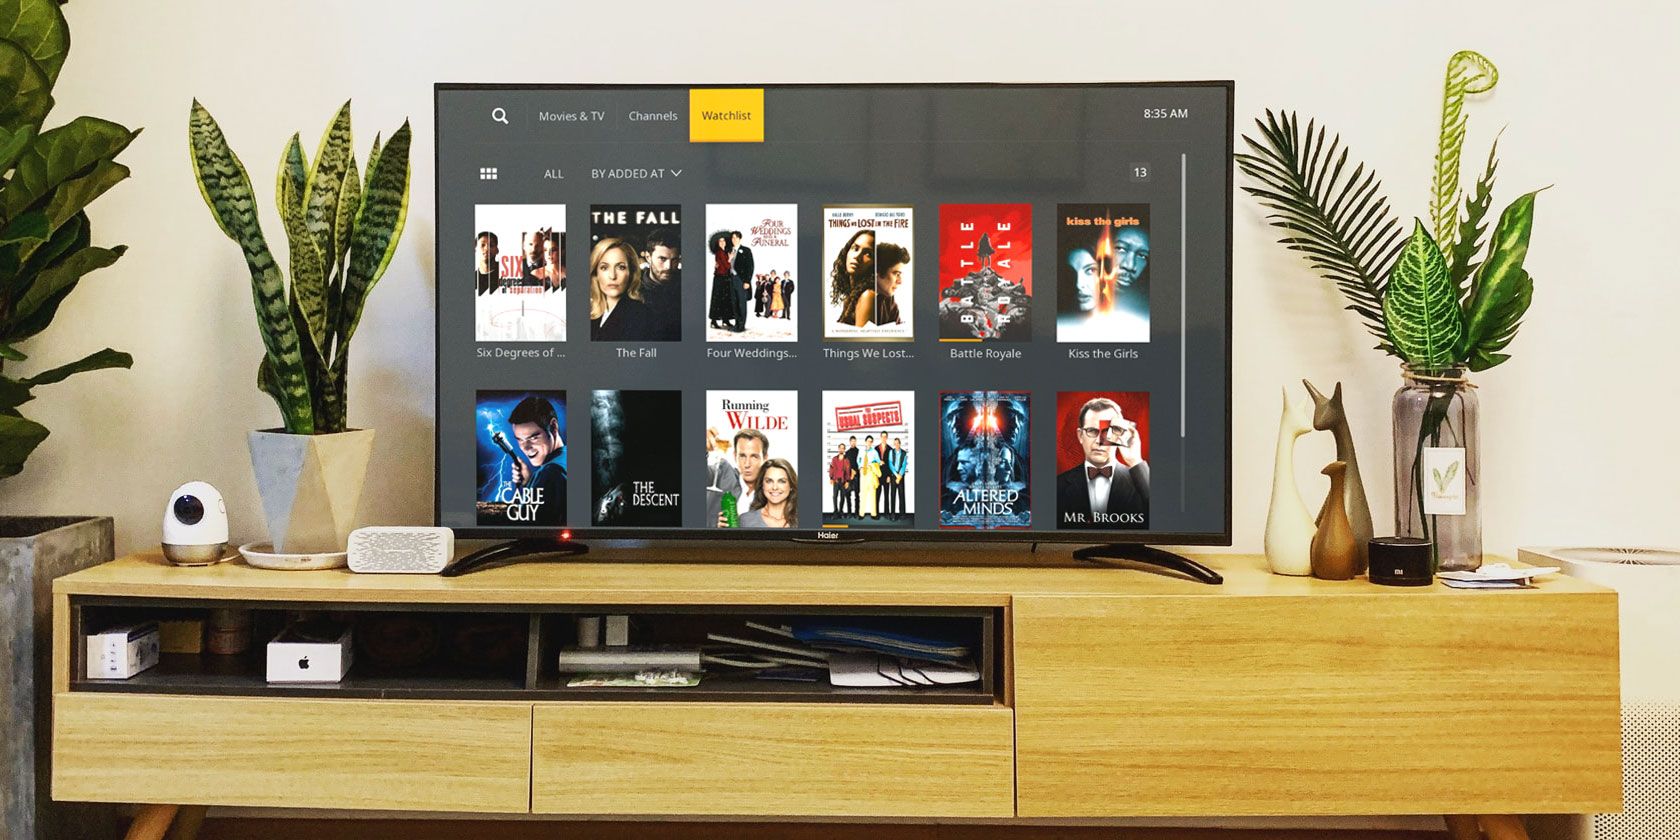 How to Organize Your Plex Library Using Collections